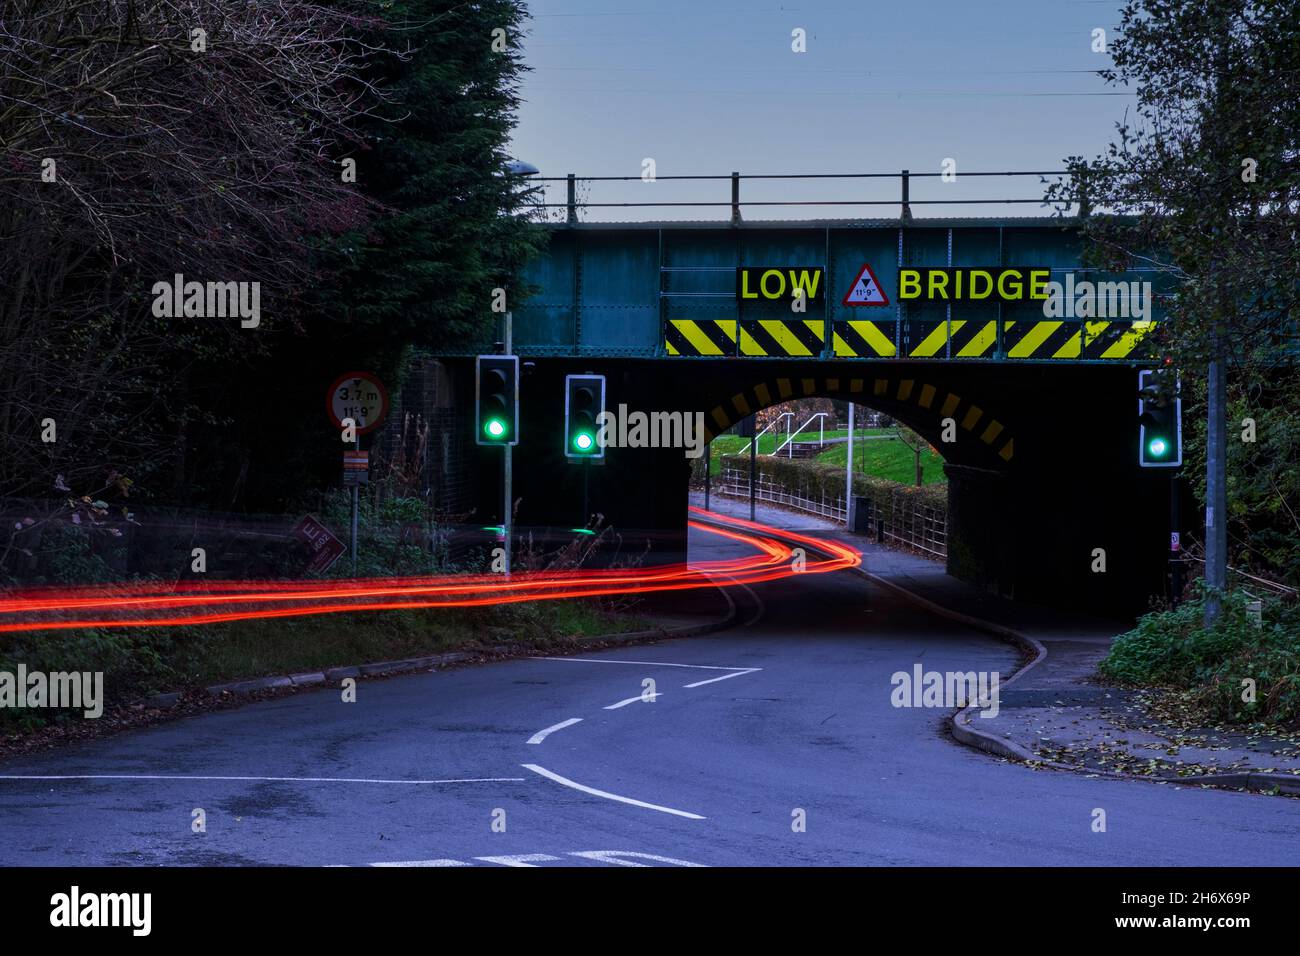 Car with red light trail under railway bridge with low bridge warning sign at dusk Stock Photo